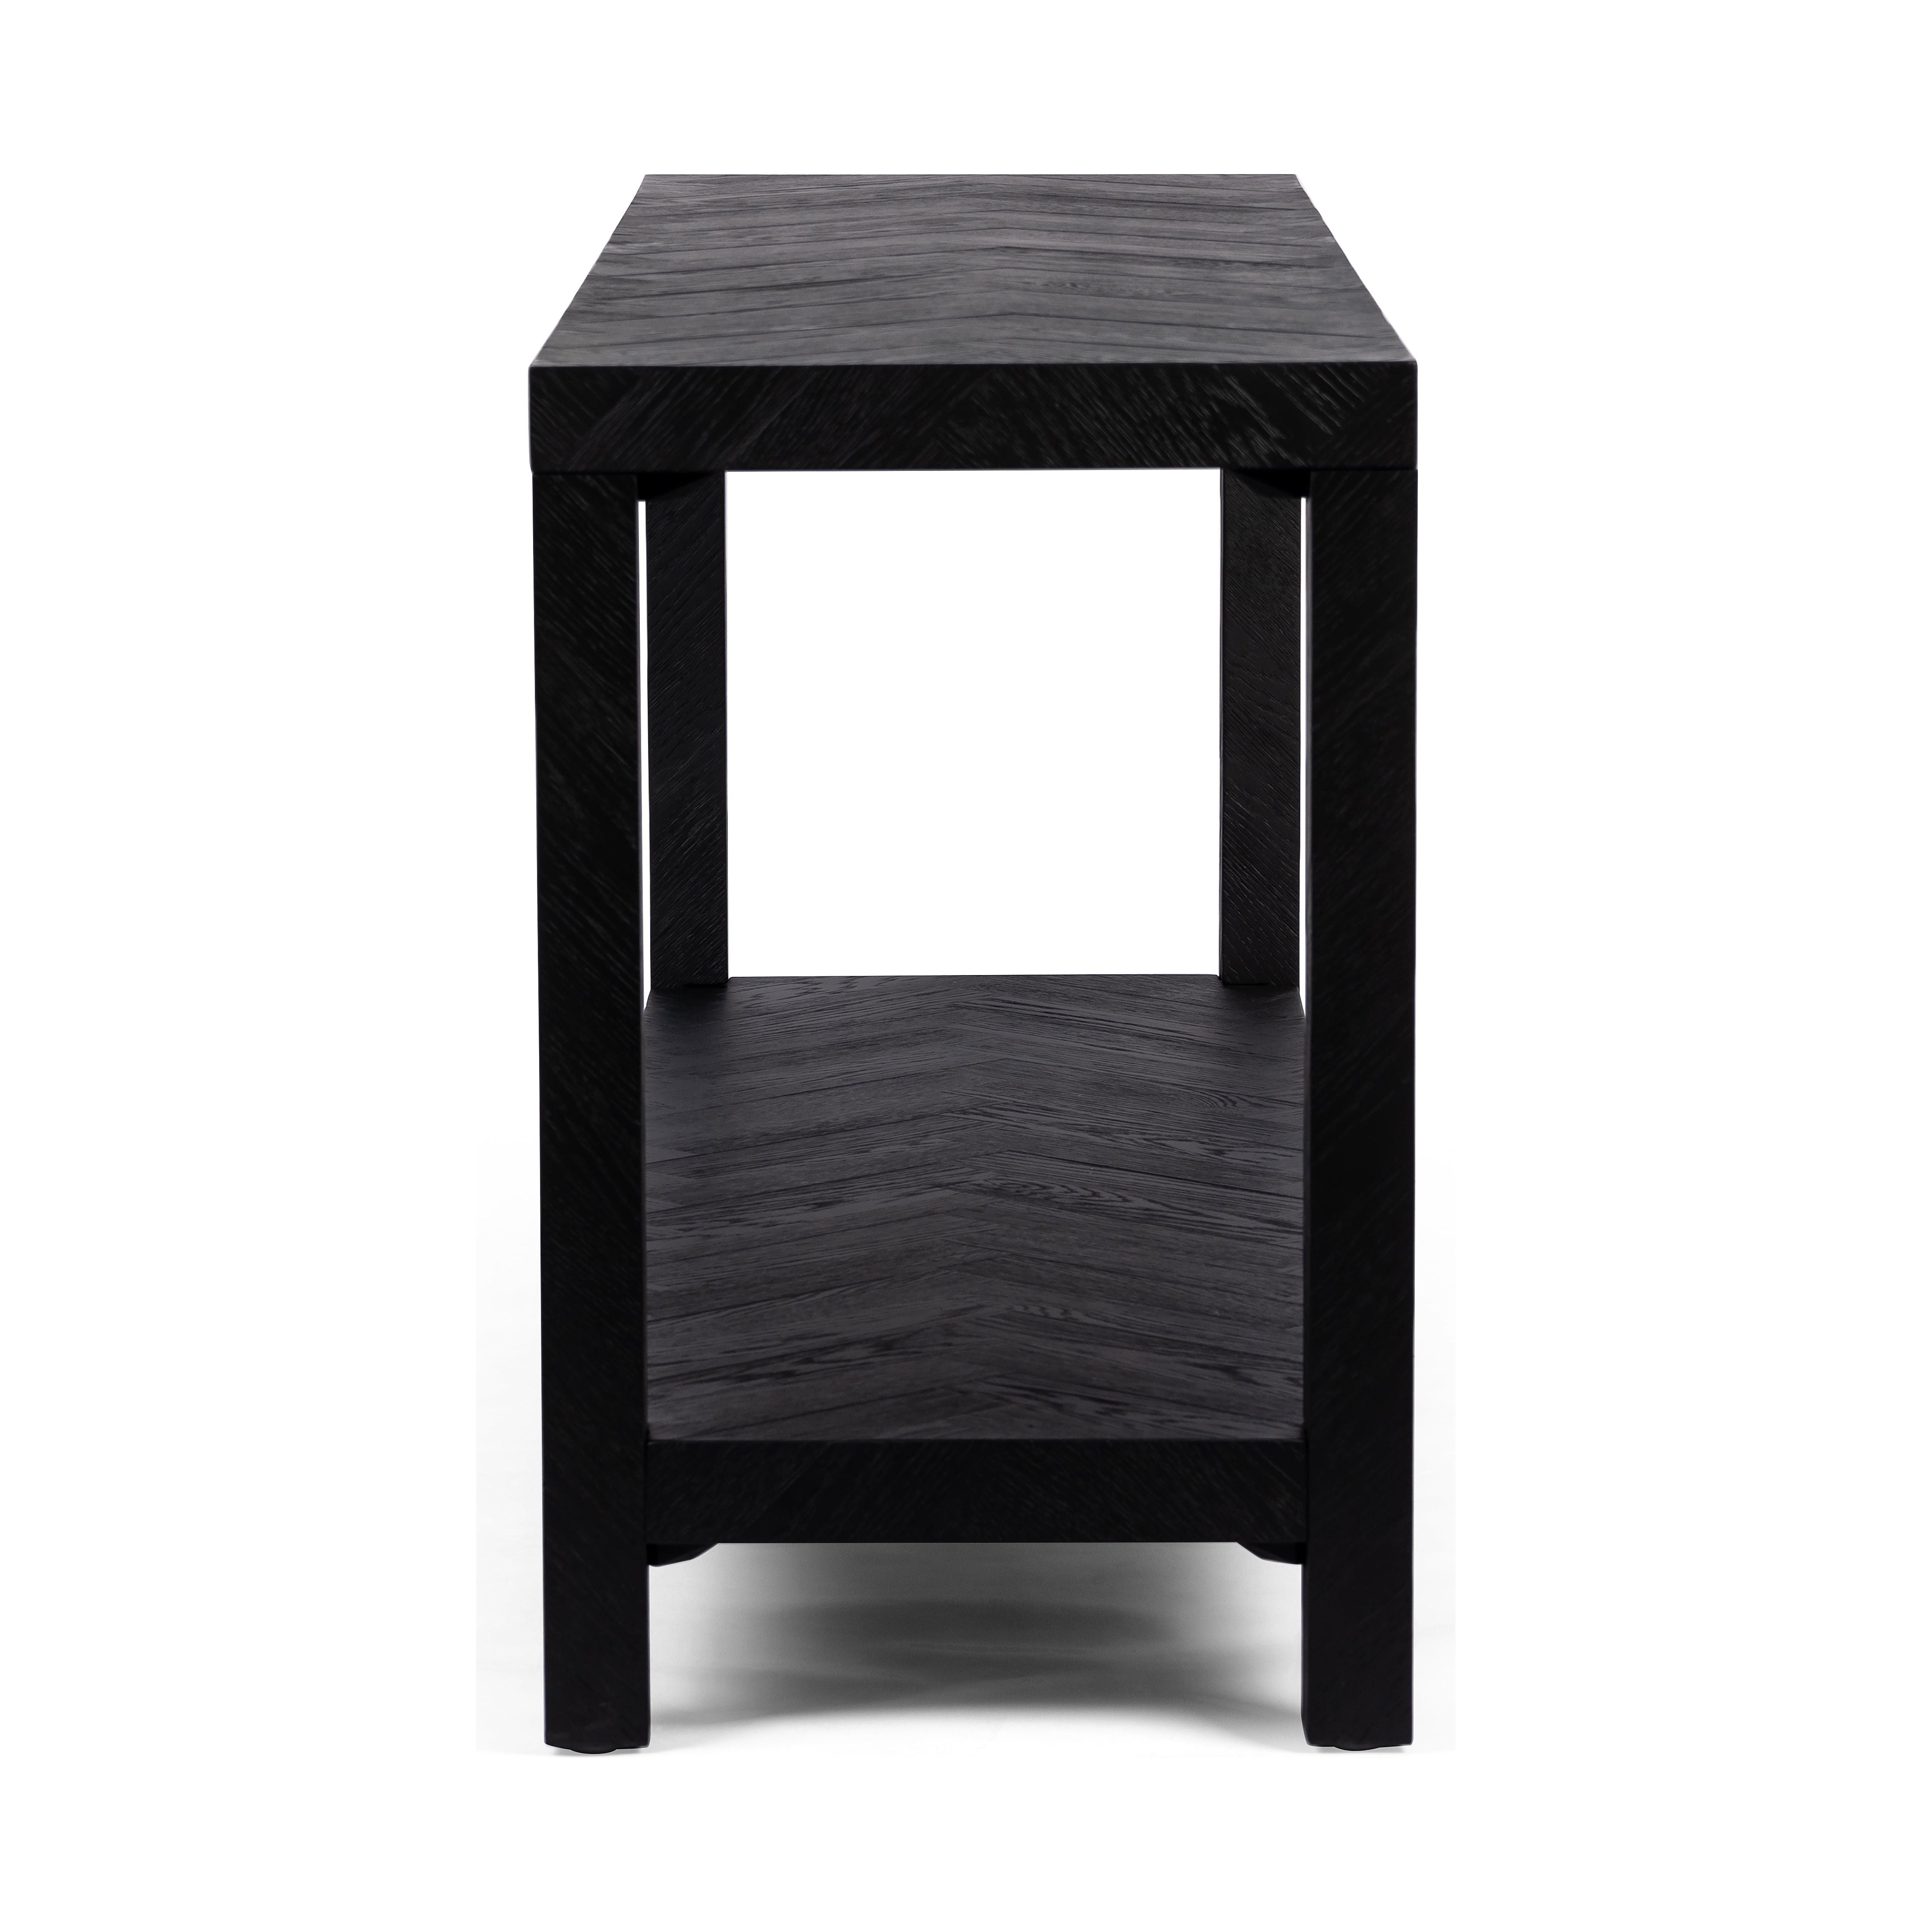 The simplest answer is often the right one. This deceptively simple Parsons-style table offers grandly exaggerated dimensions and a subtle, herringbone parquet pattern on every surface. Amethyst Home provides interior design, new construction, custom furniture, and area rugs in the Scottsdale metro area.